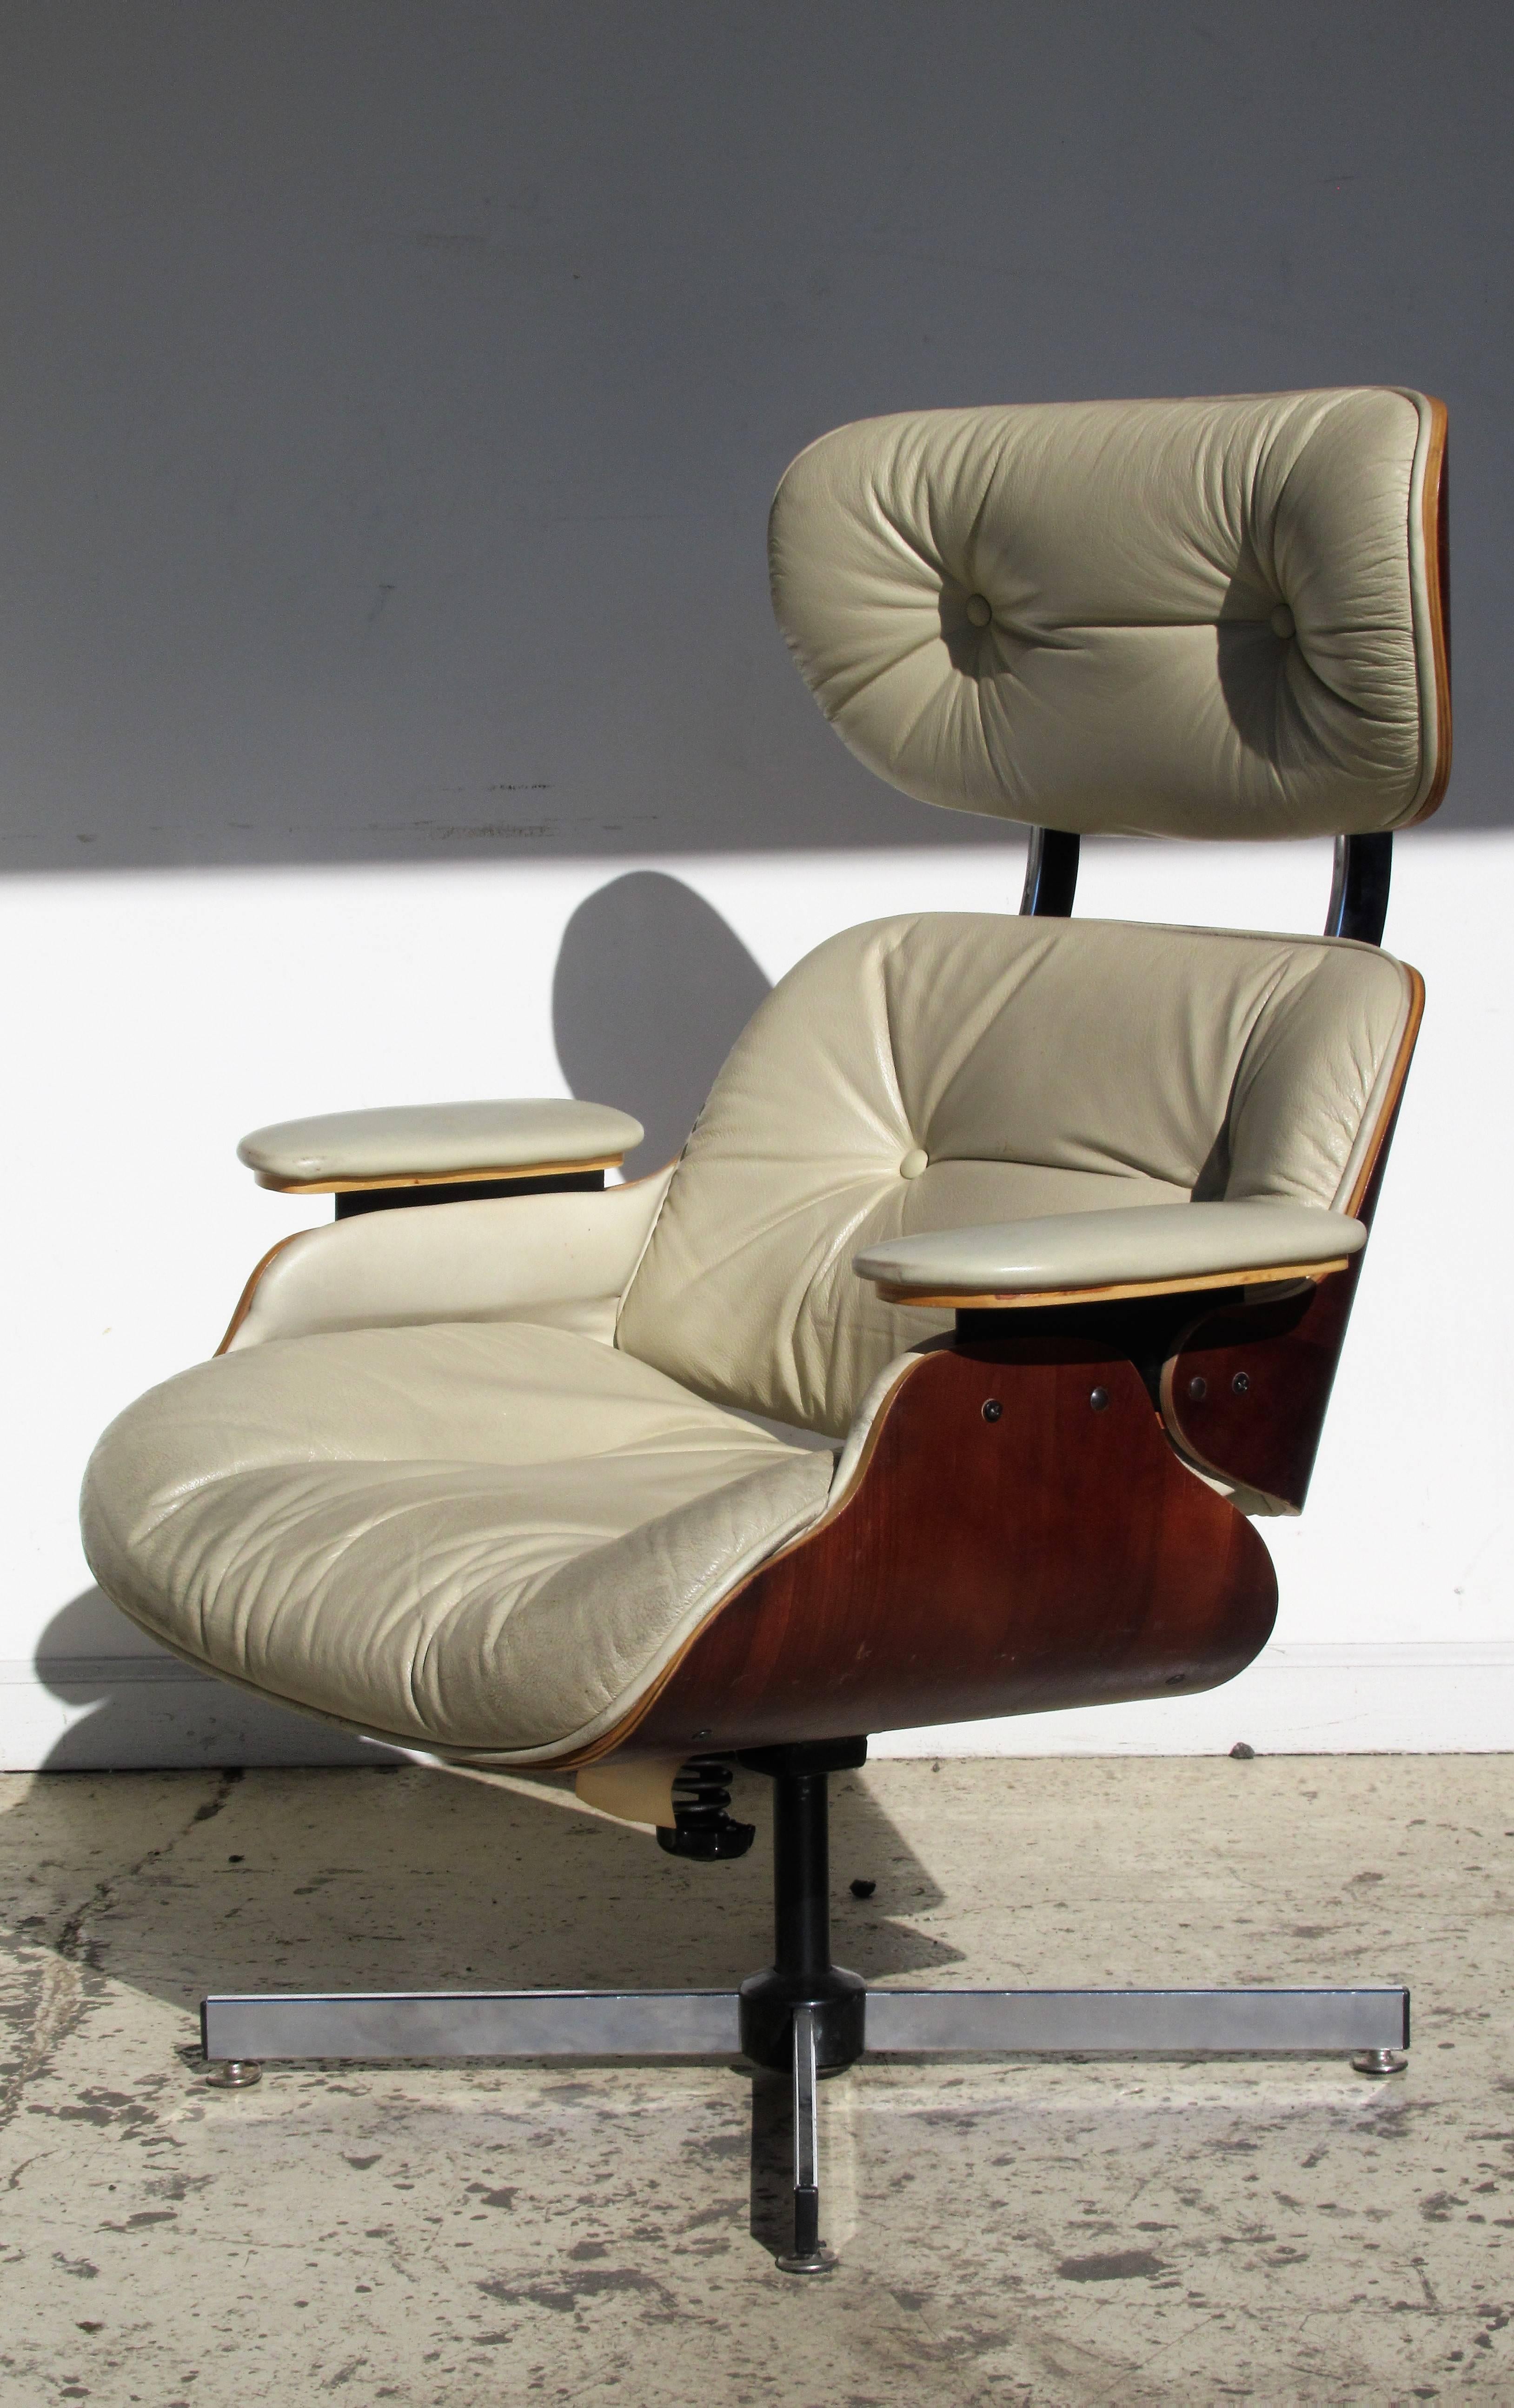 Plycraft swivel tilt lounge chair in hard to find pale cream leather upholstery overall beautiful color patina to richly grained wood. The chair in original good vintage condition.